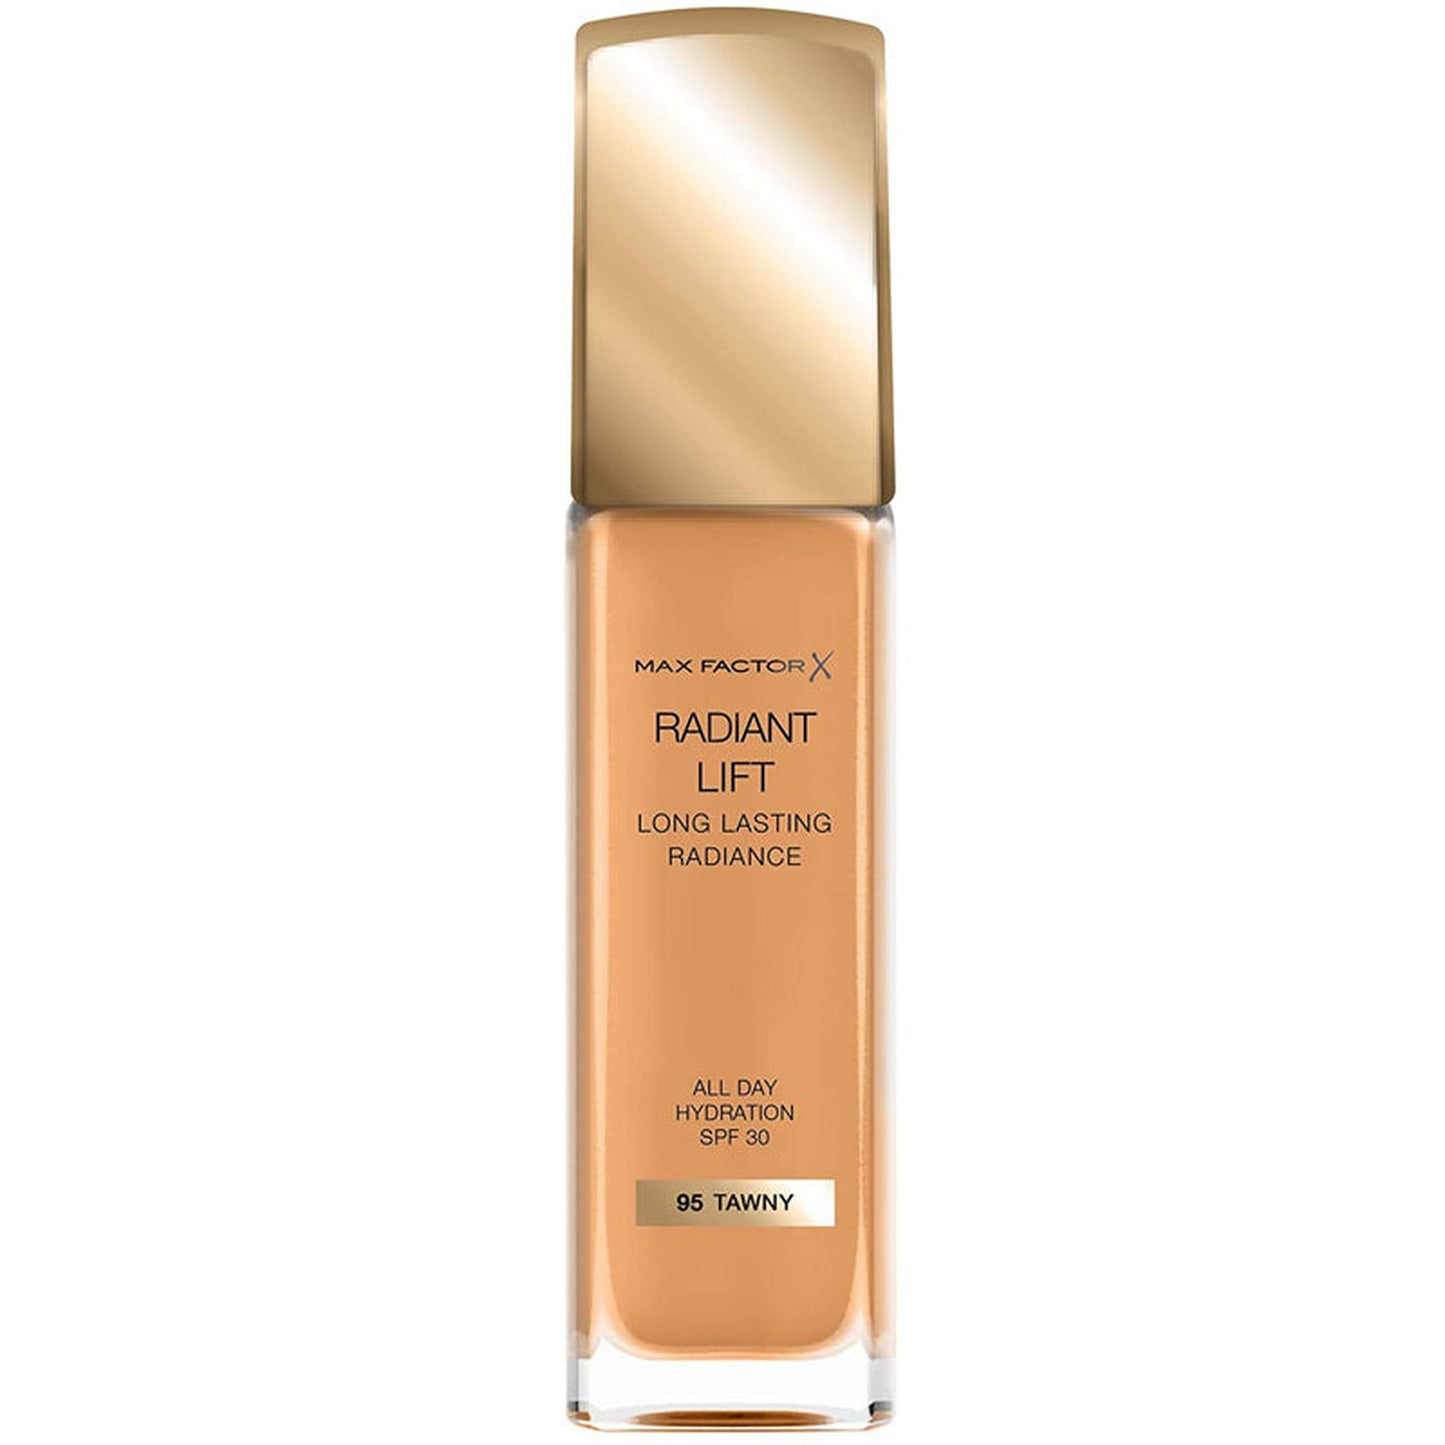 MAX Factor Radiant Lift Long Lasting Radiance Foundation SPF30 95 Tawny-Max Factor-BeautyNmakeup.co.uk